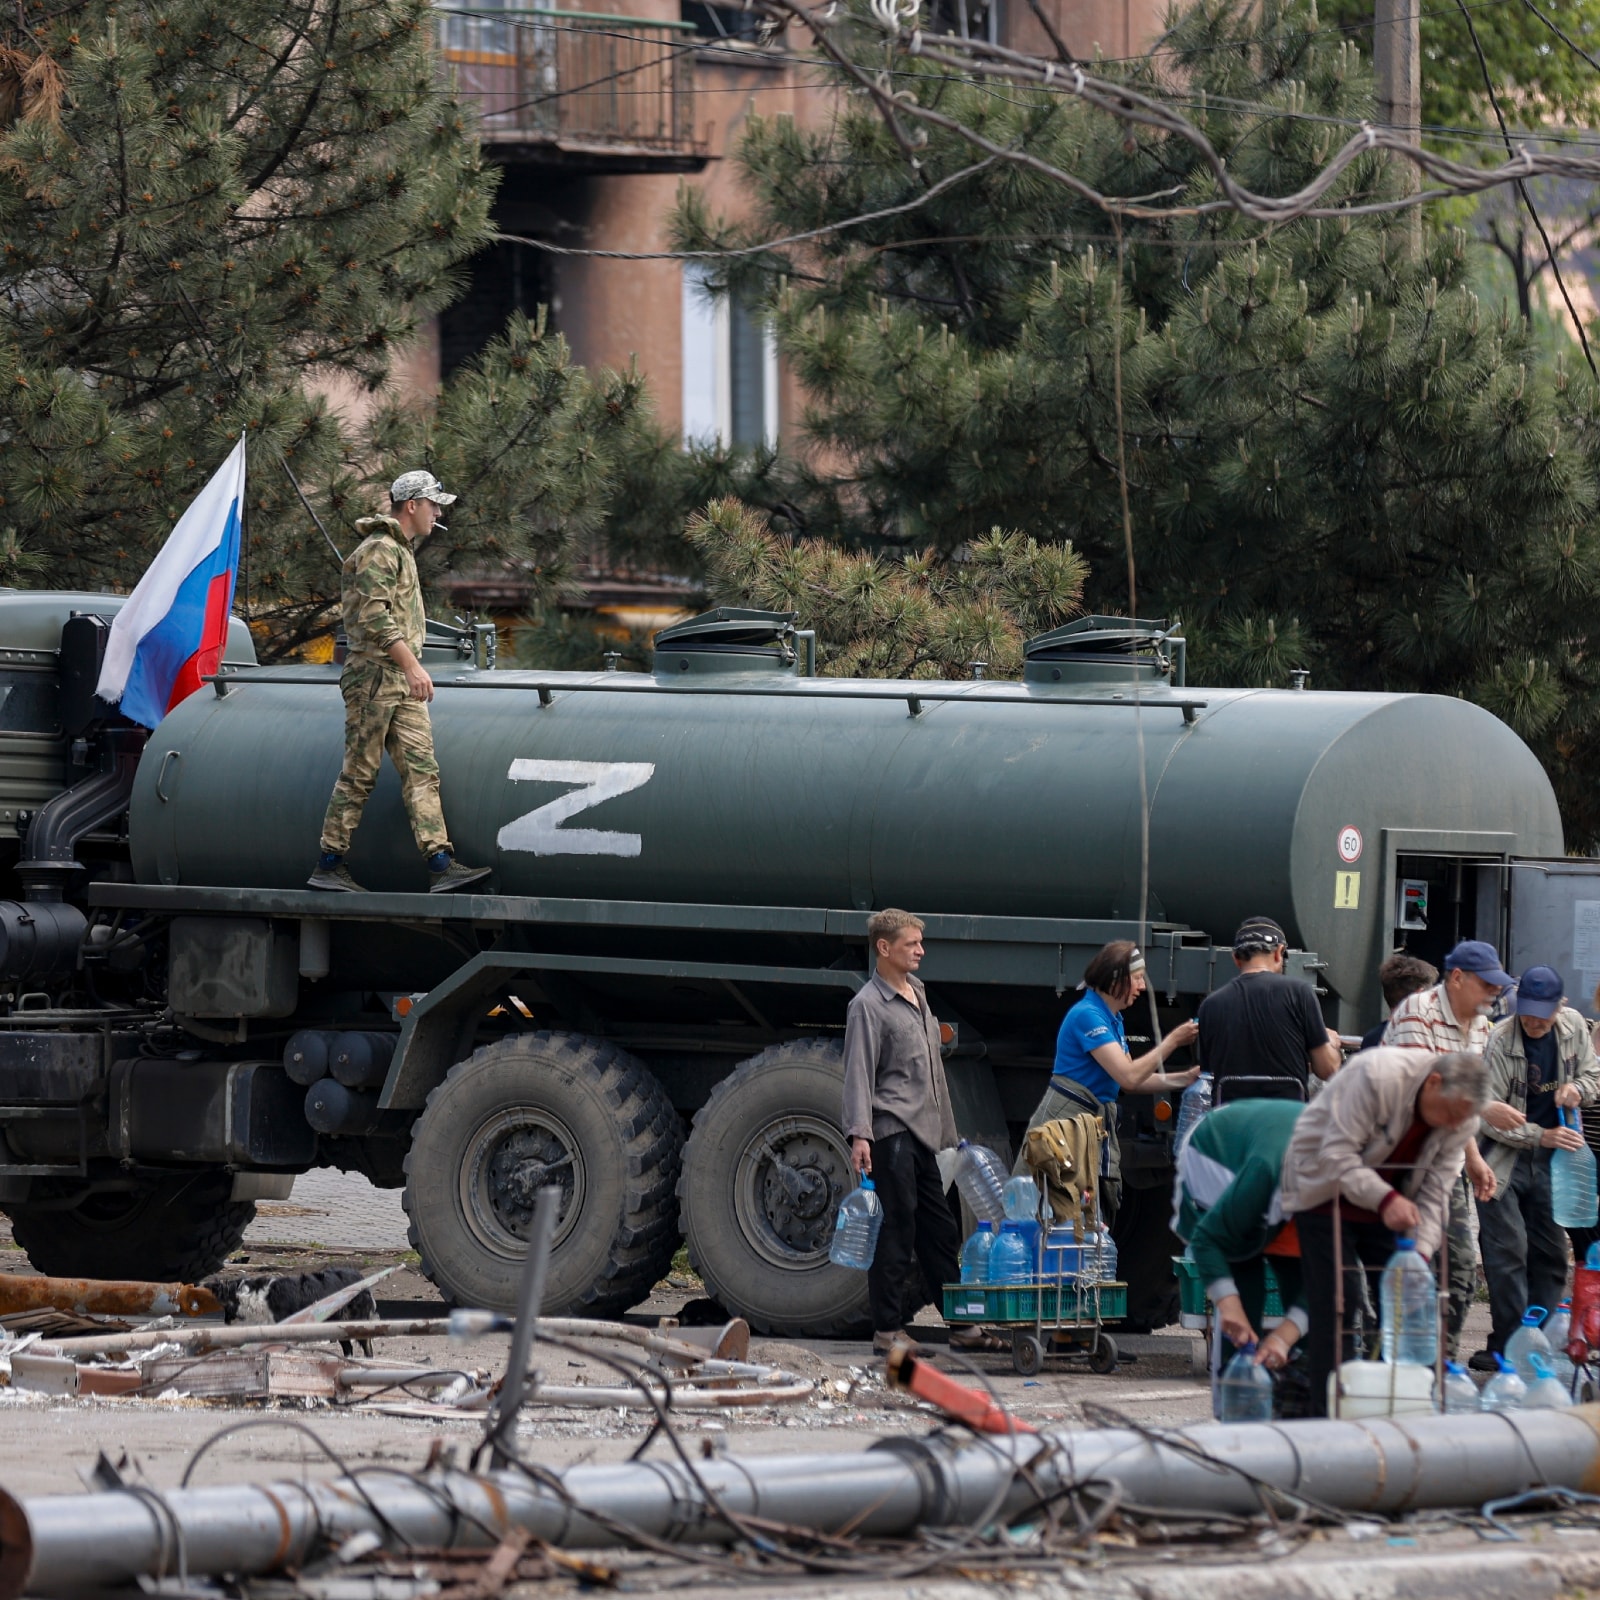 Local civilians gather to receive pure water distributed by Russian Emergency Situations Ministry in Mariupol, in territory under the government of the Donetsk People's Republic, eastern Ukraine with the letter Z, which has become a symbol of the Russian military on a board of the truck. (Image and Caption: AP Photo/Alexei Alexandrov)